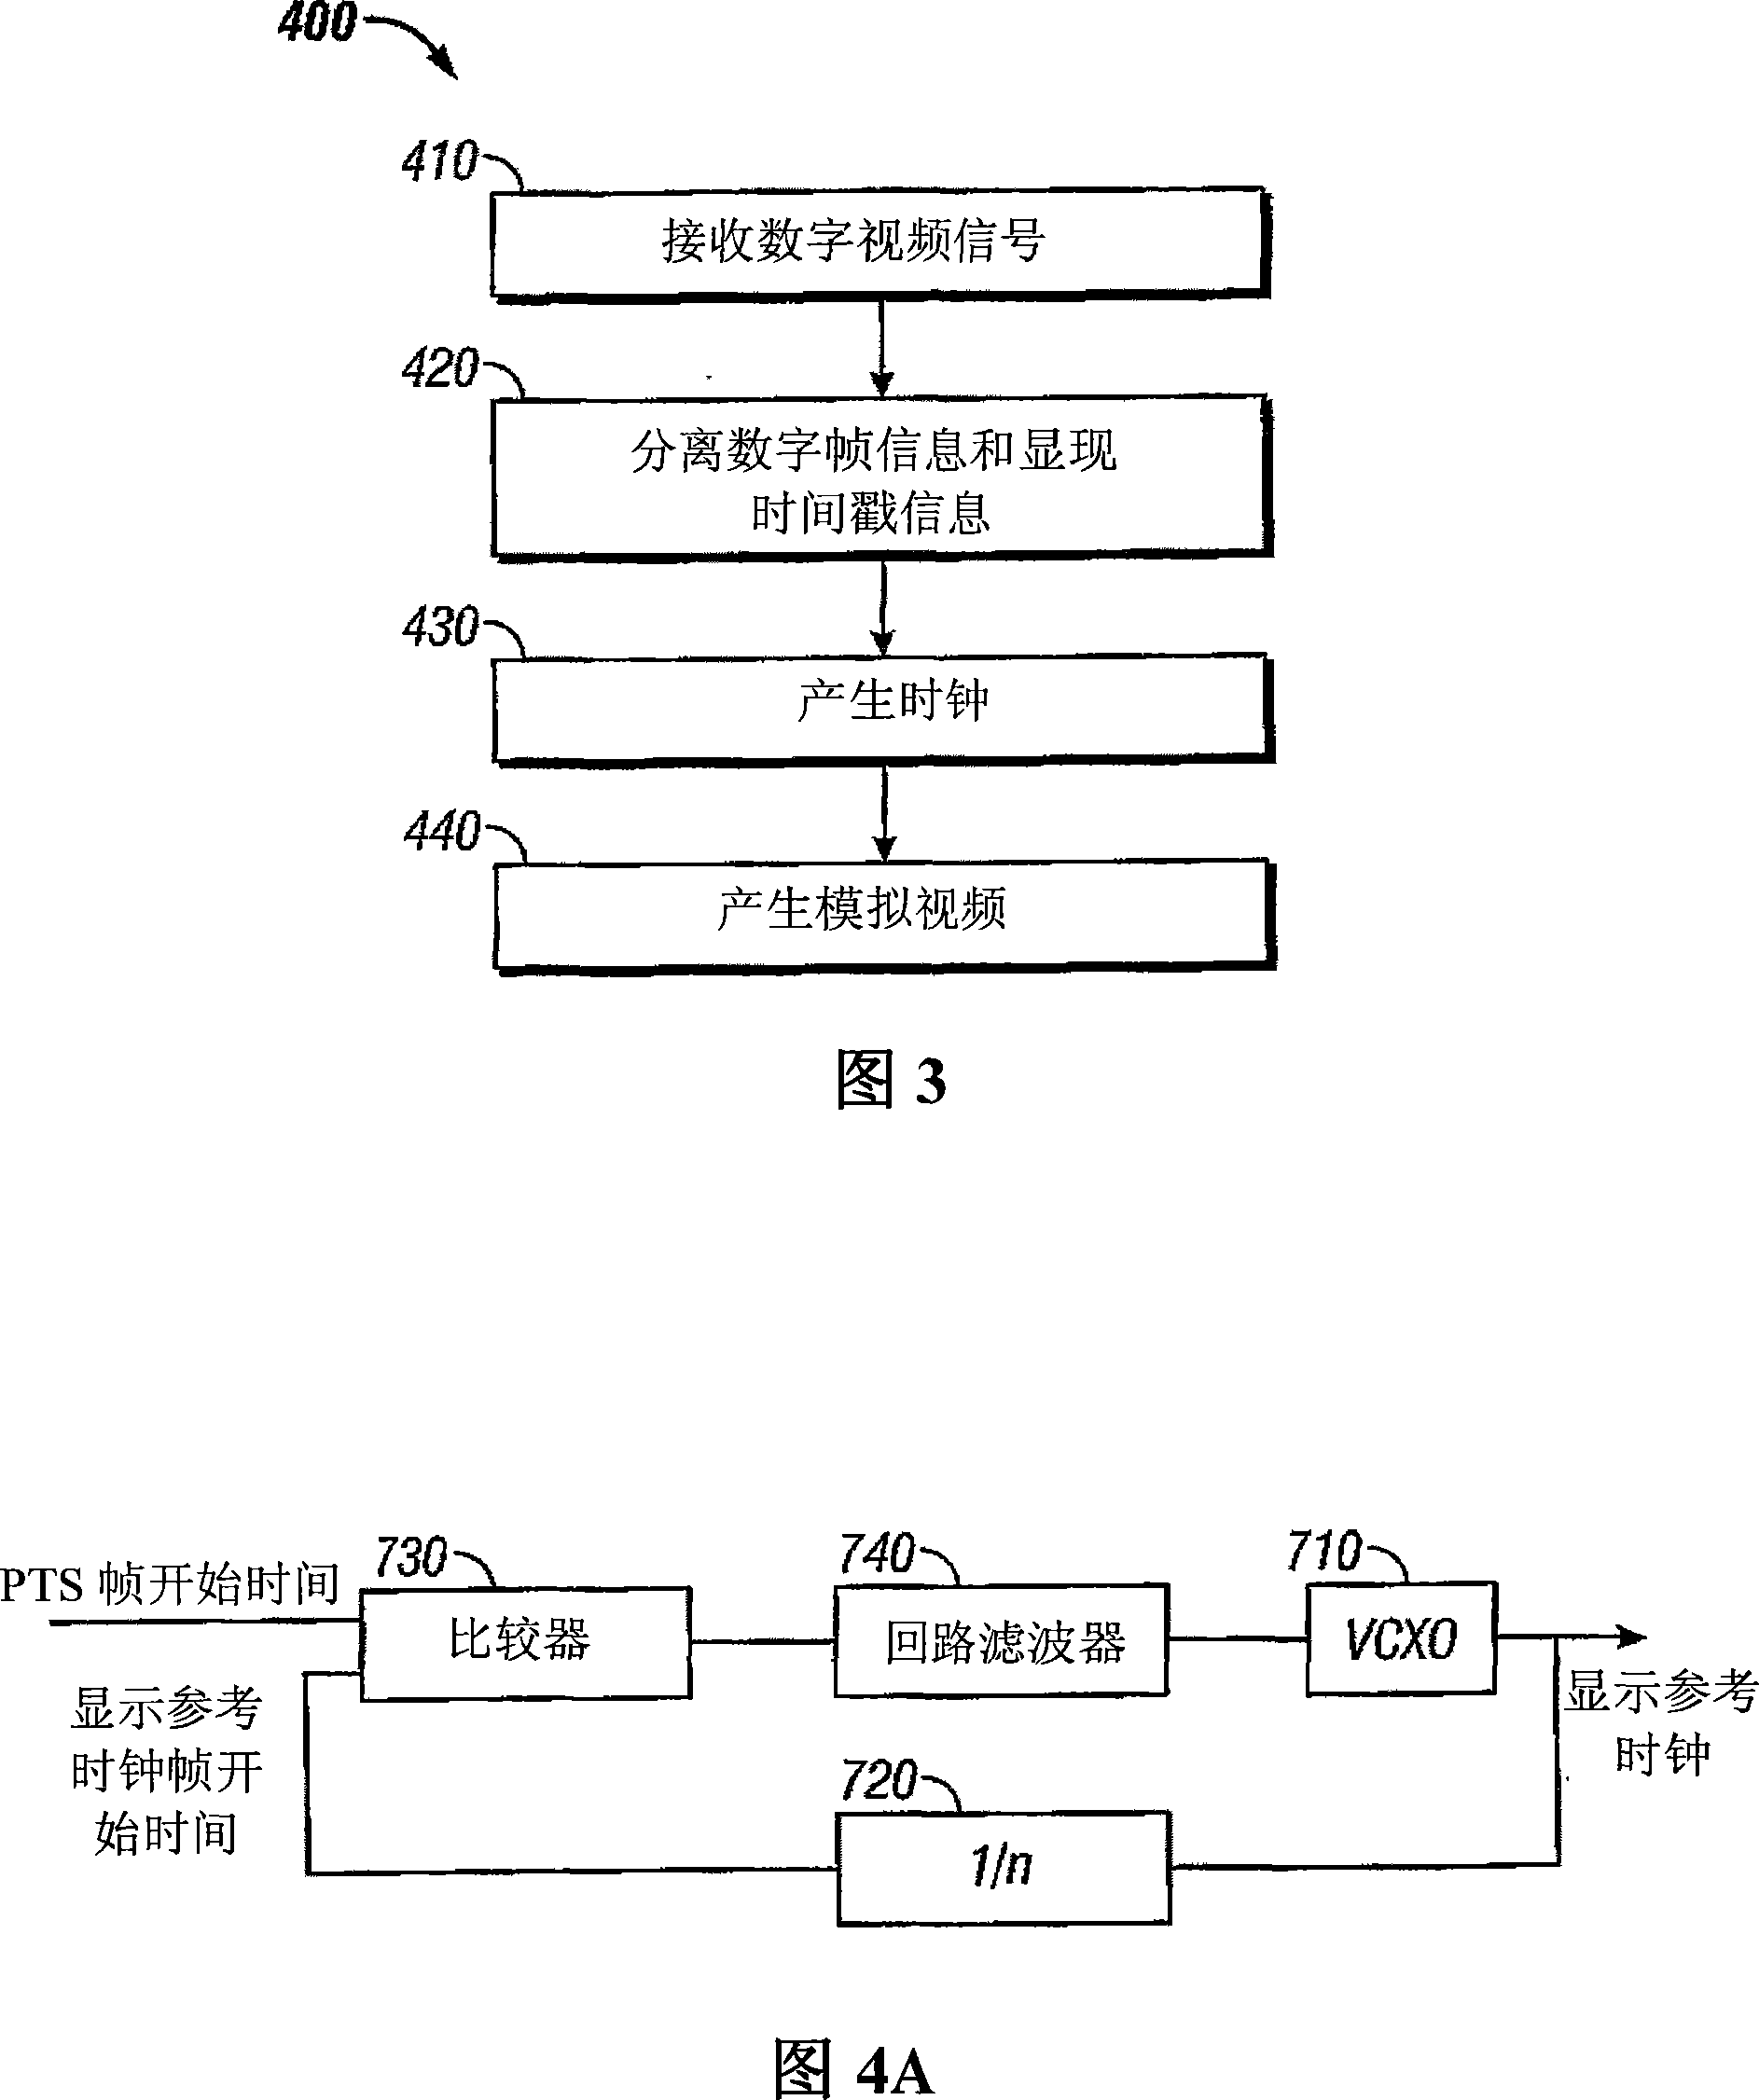 Time base reconstruction for converting discrete time labeled video into analog output signal